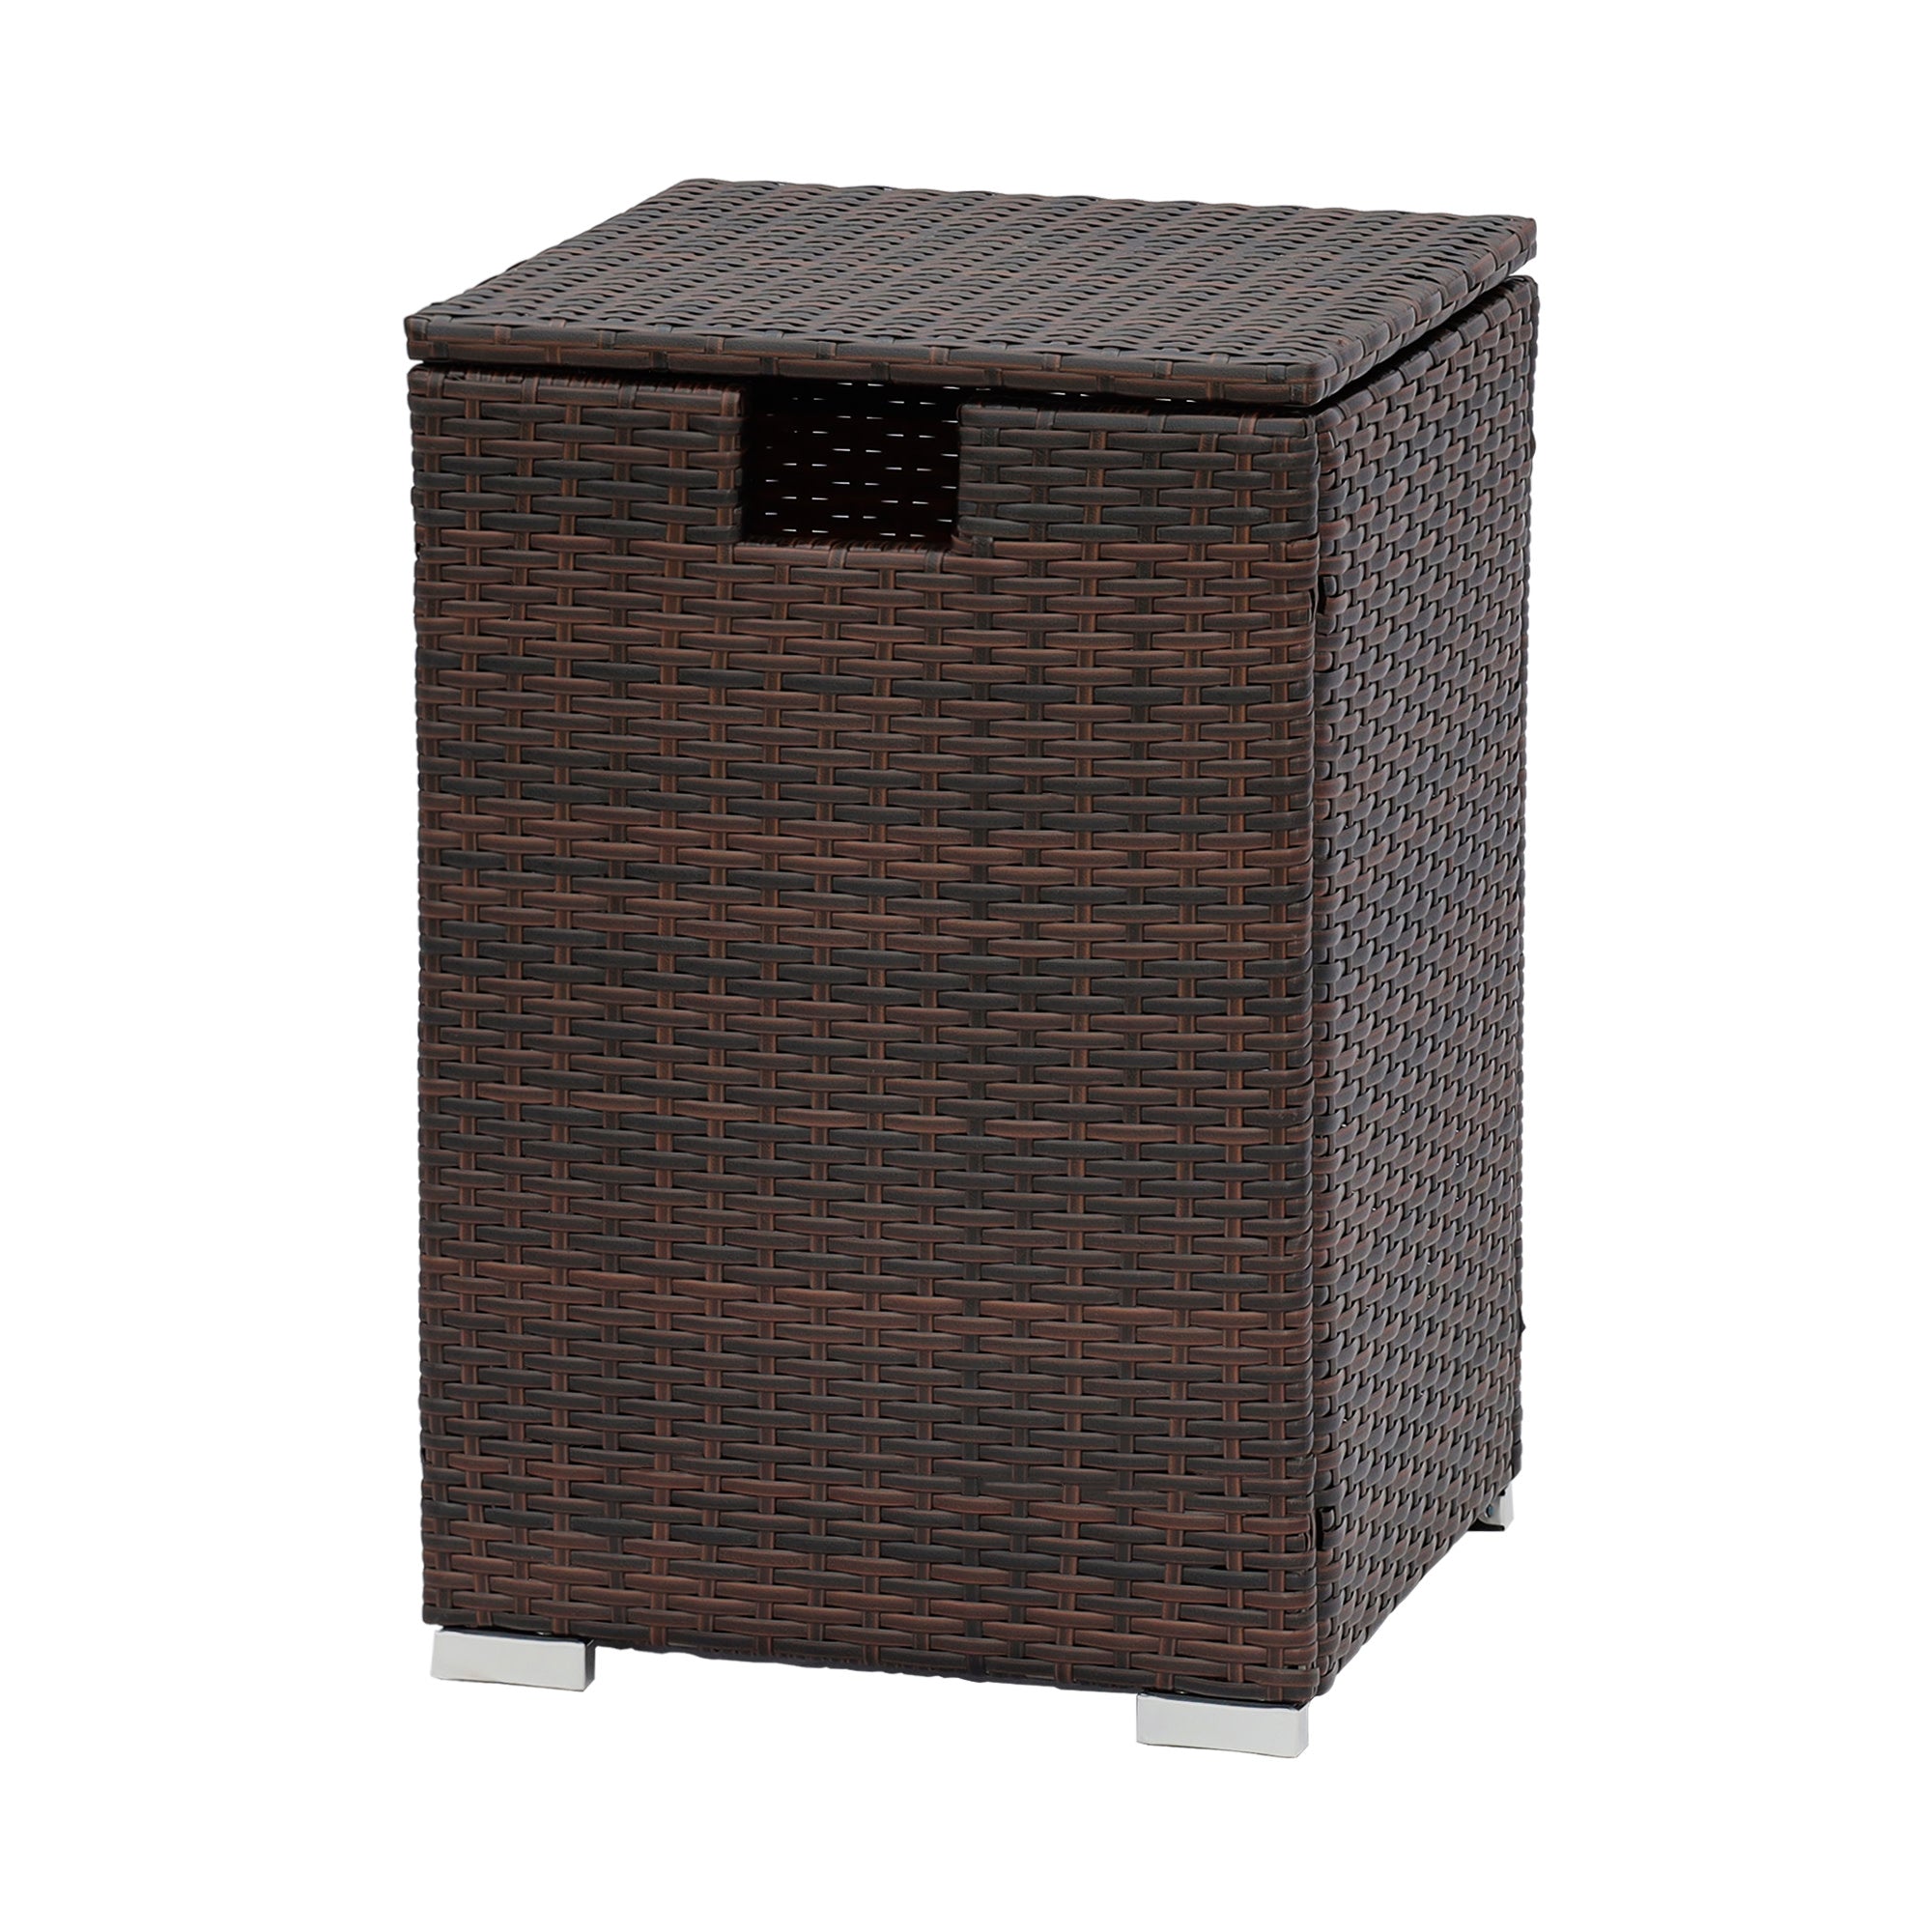 Teamson Home Gas Tank Wicker Cover Table for 20 lb Propane Tanks, Brown